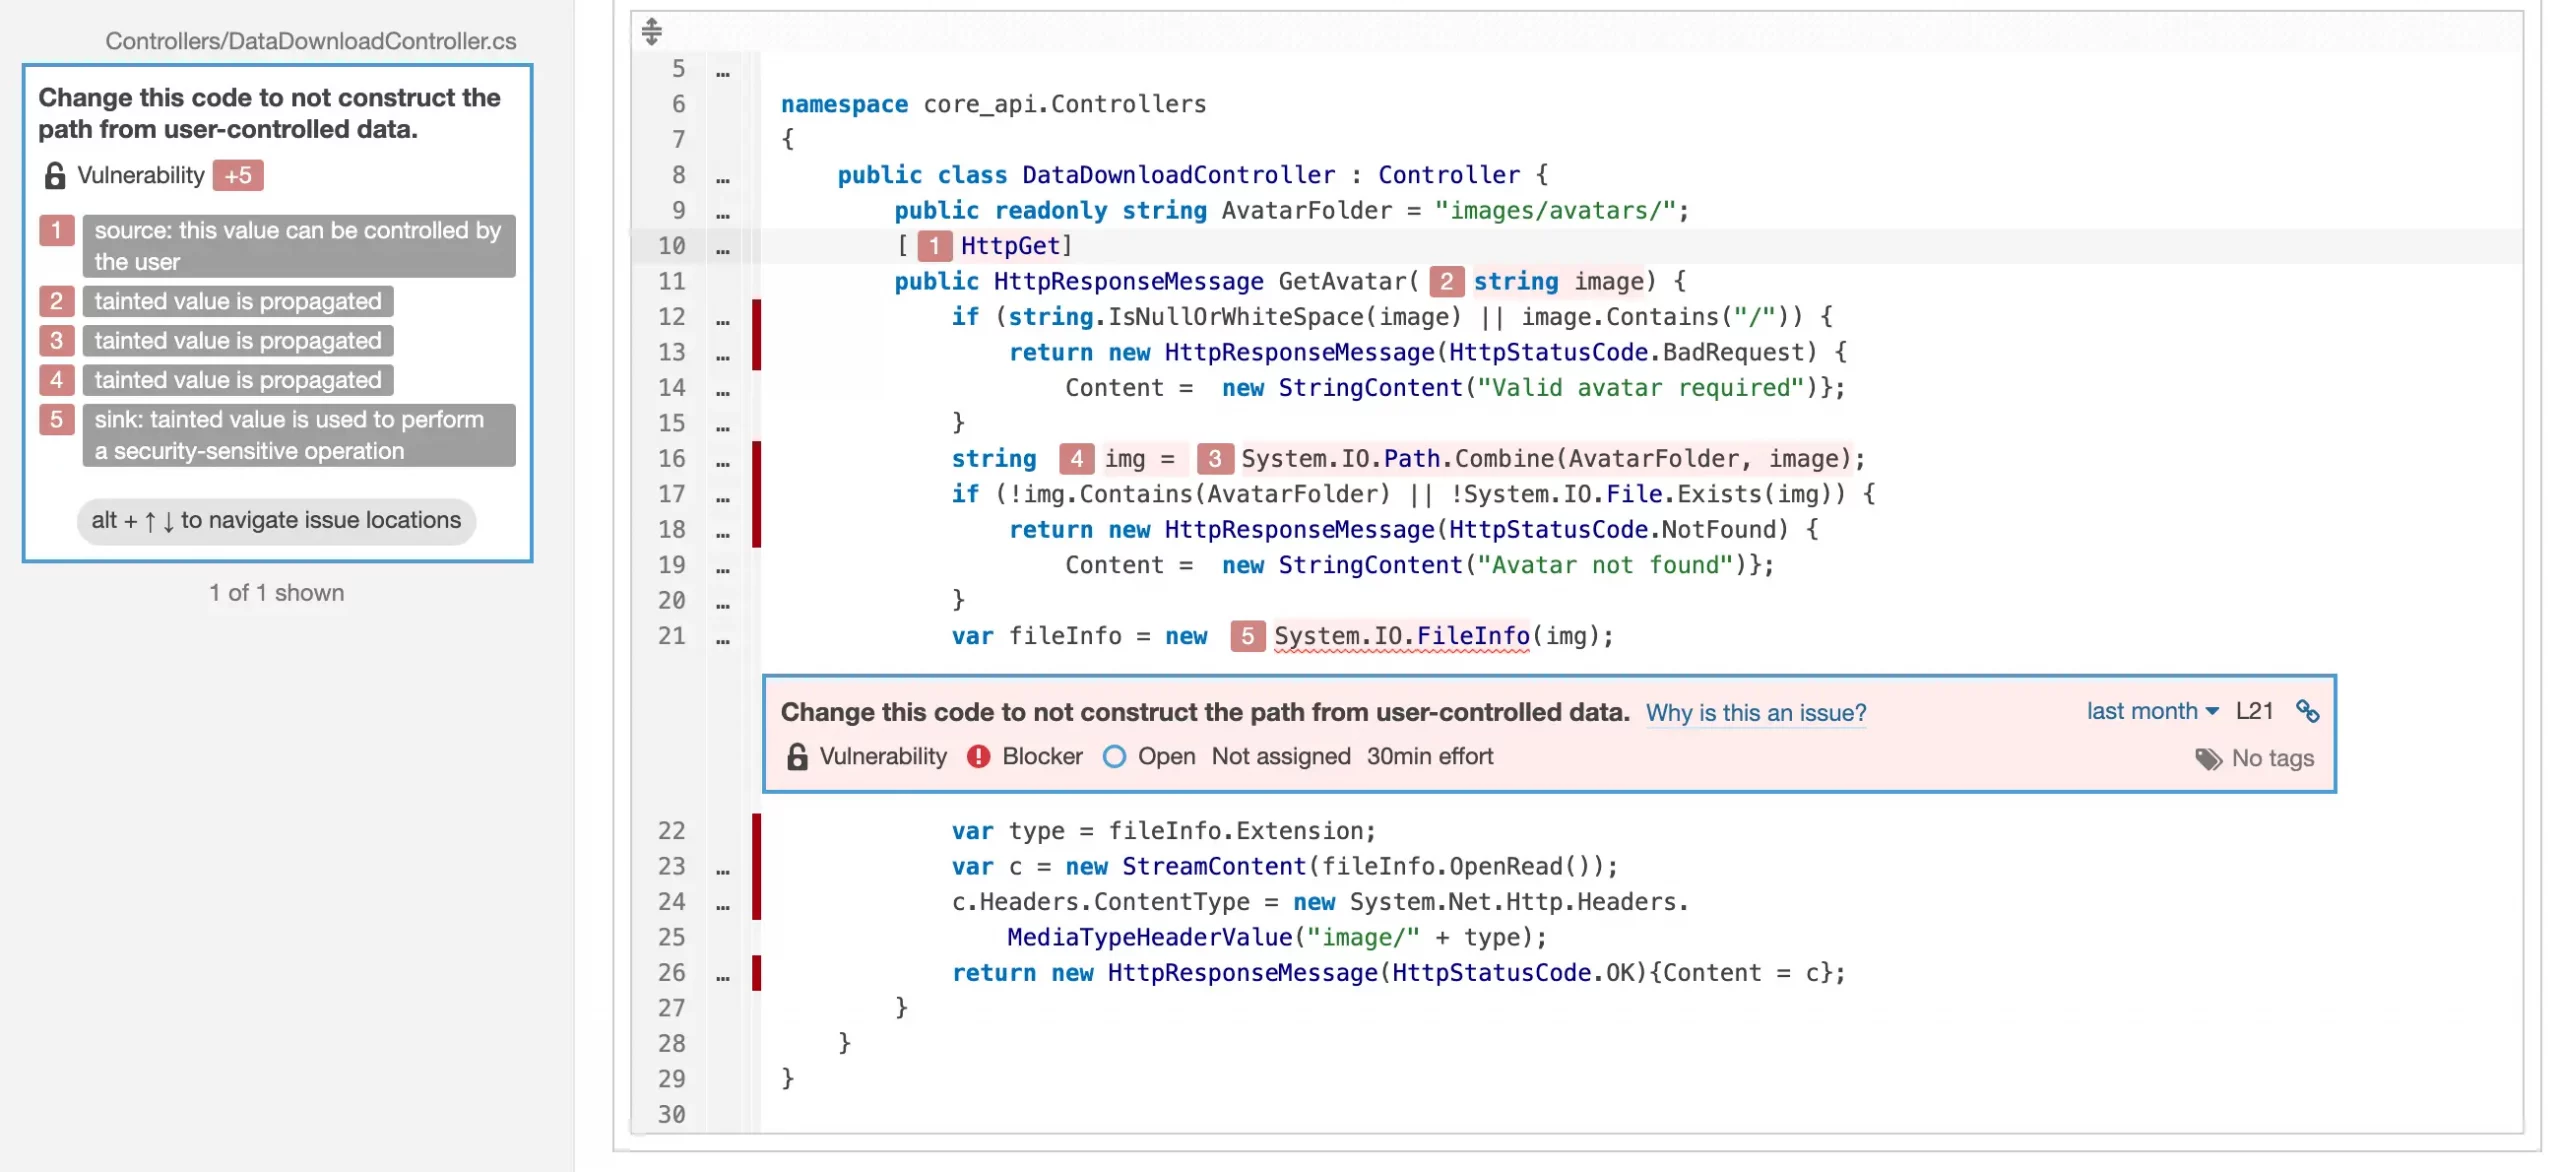 geekAbyte: Overview of Exceptions In Java and Some SonarQube Recommendations